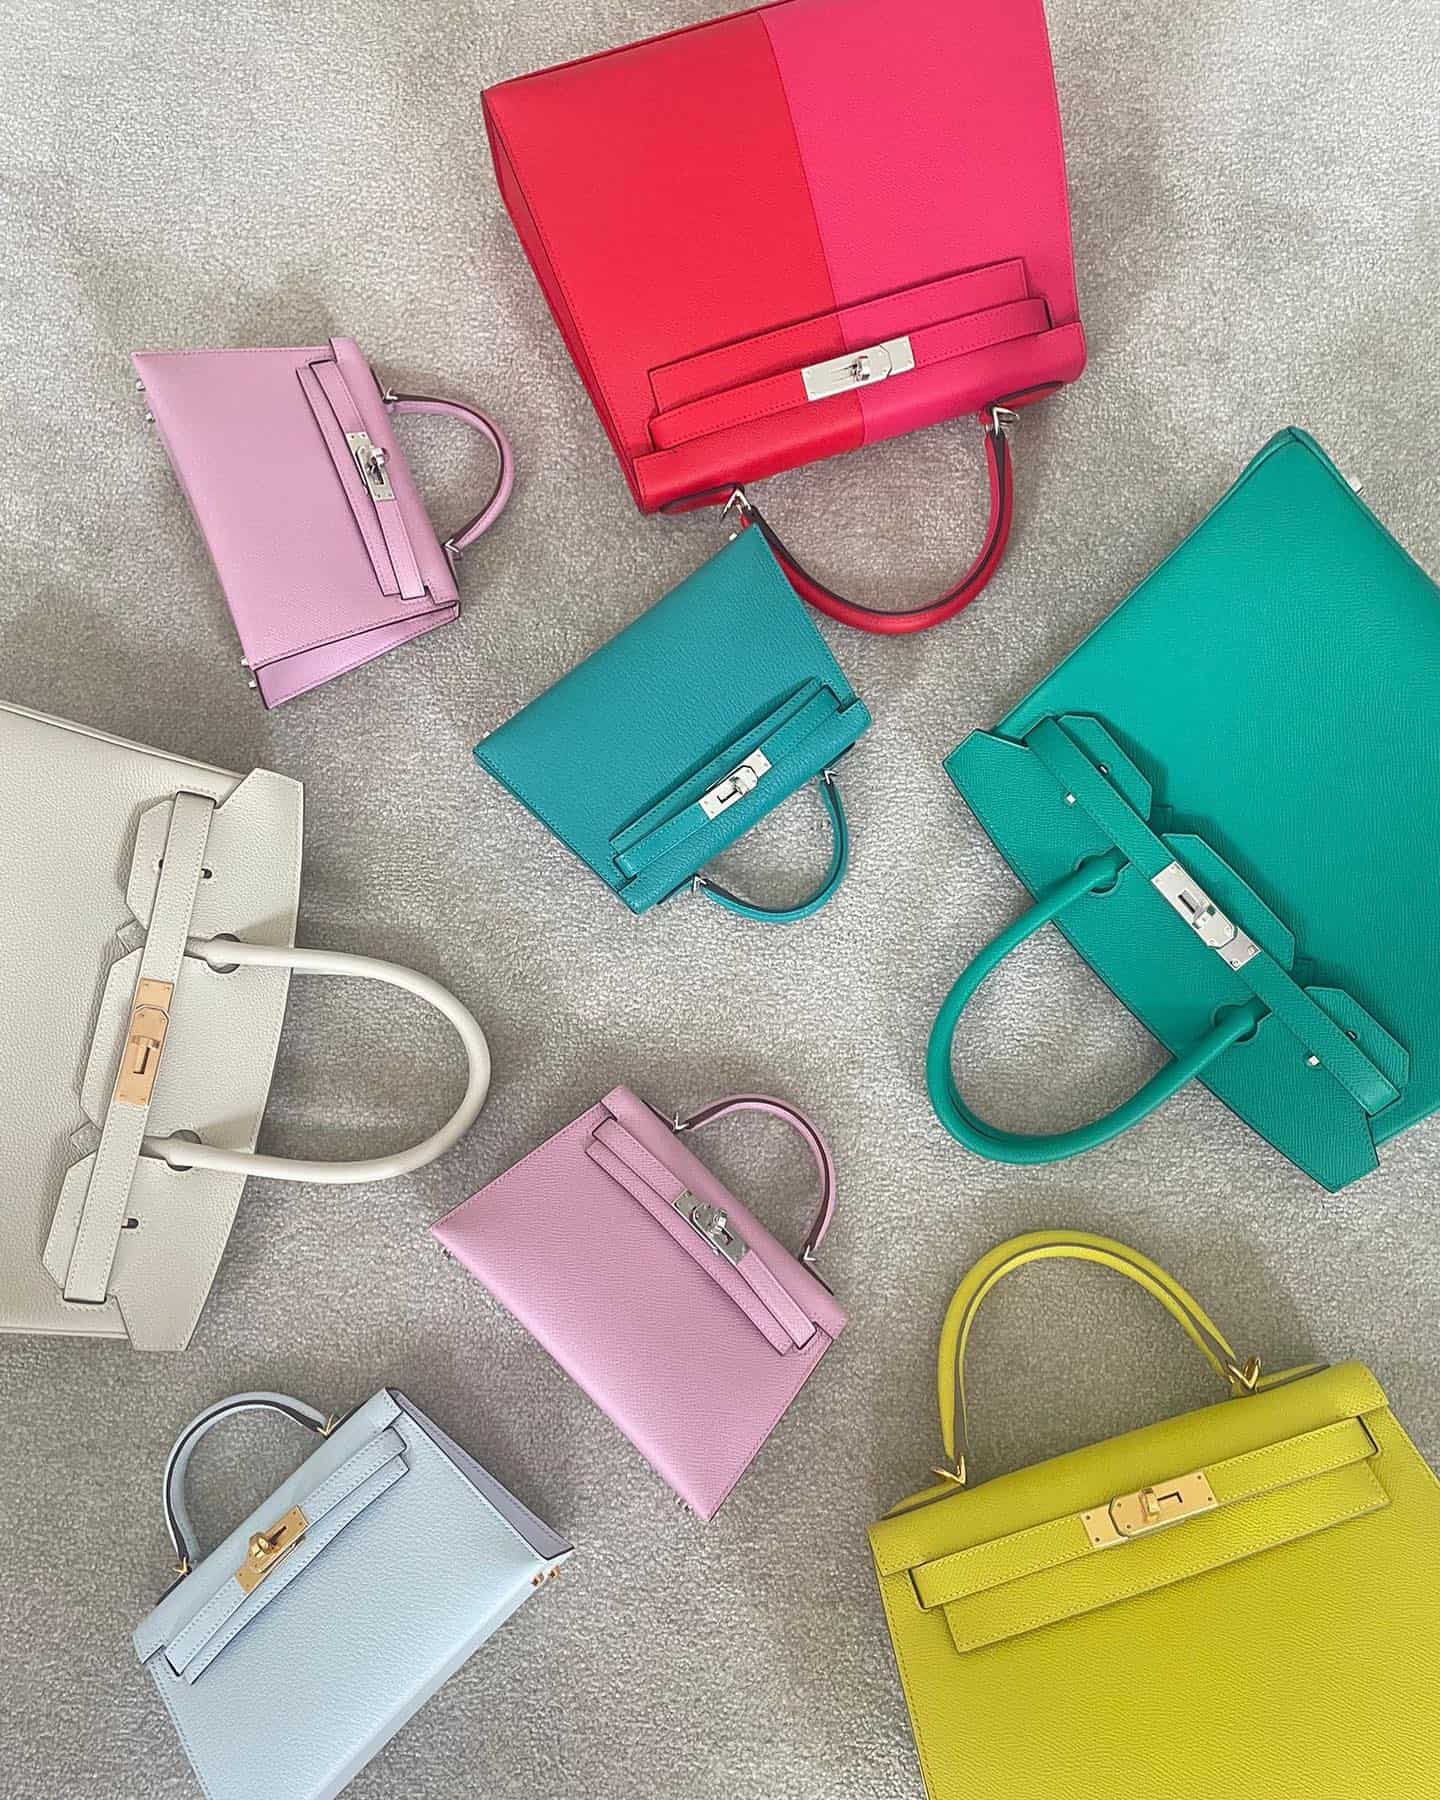 Which Hermes Colors are the hardest to purchase